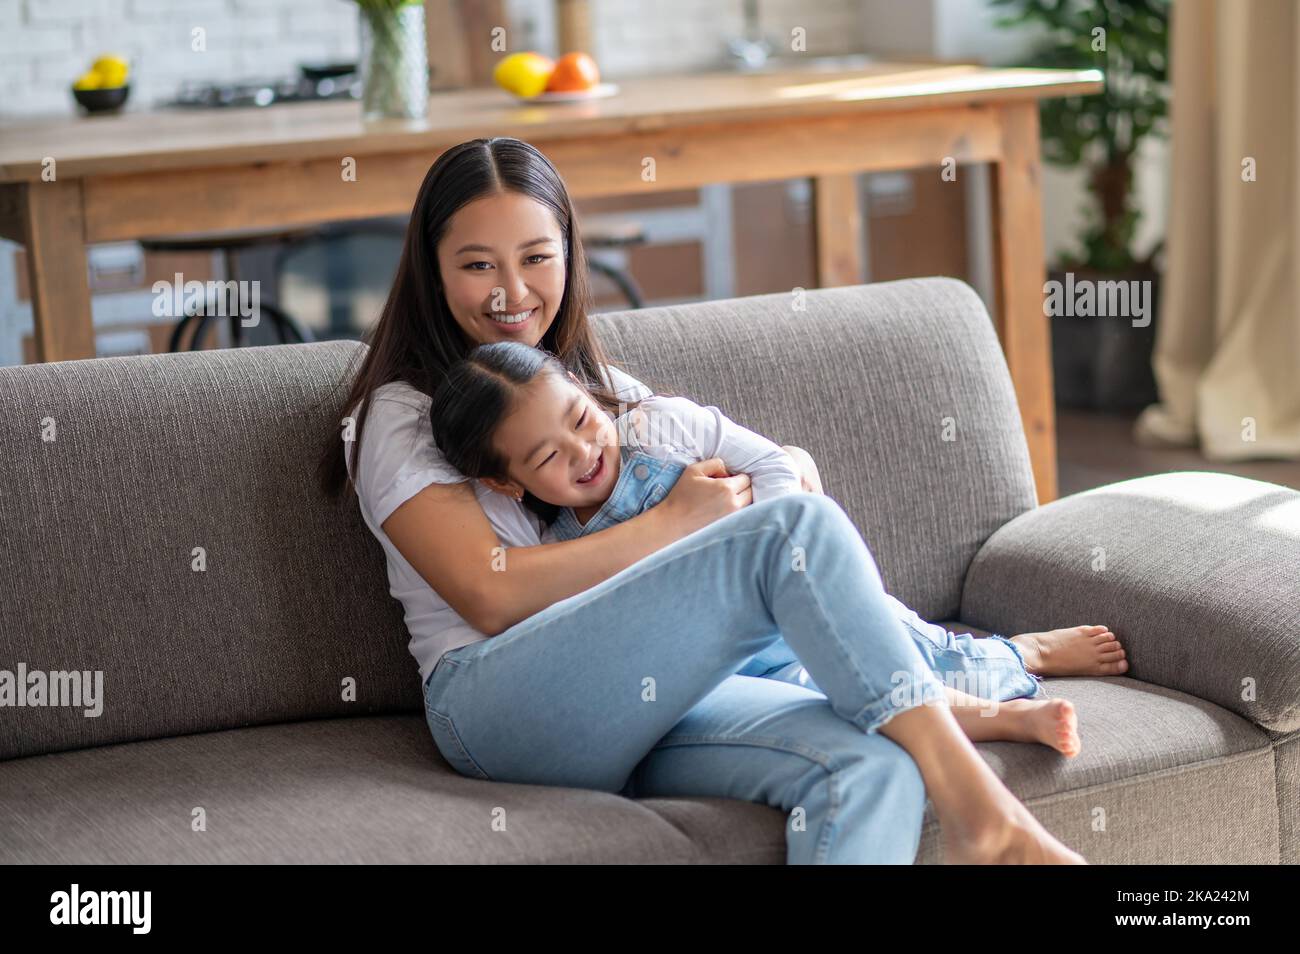 Loving young mother enjoying the company of her child Stock Photo